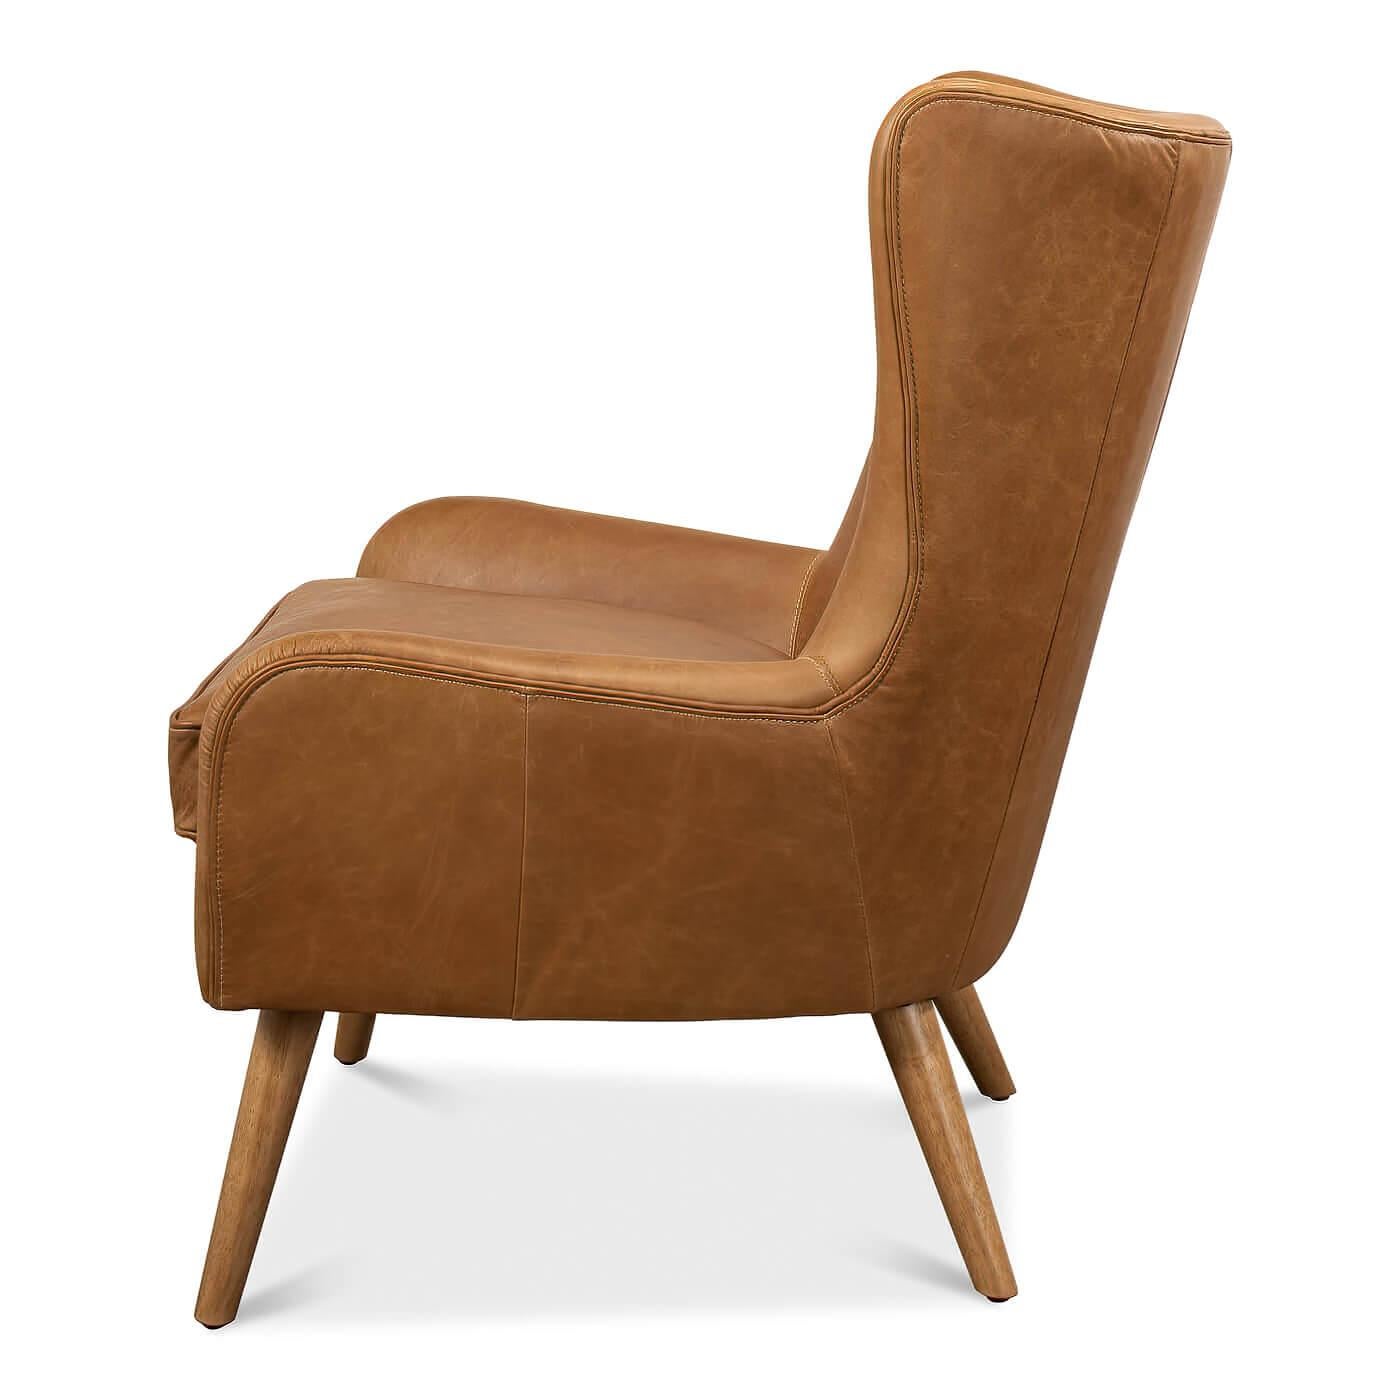 A Mid-Century Modern style brown leather armchair. The top and the arms of the chair feature a smooth curved design and sits on splayed hardwood framed legs. The back of the chair has tailored tufted button accents. This contemporary chair has a nod